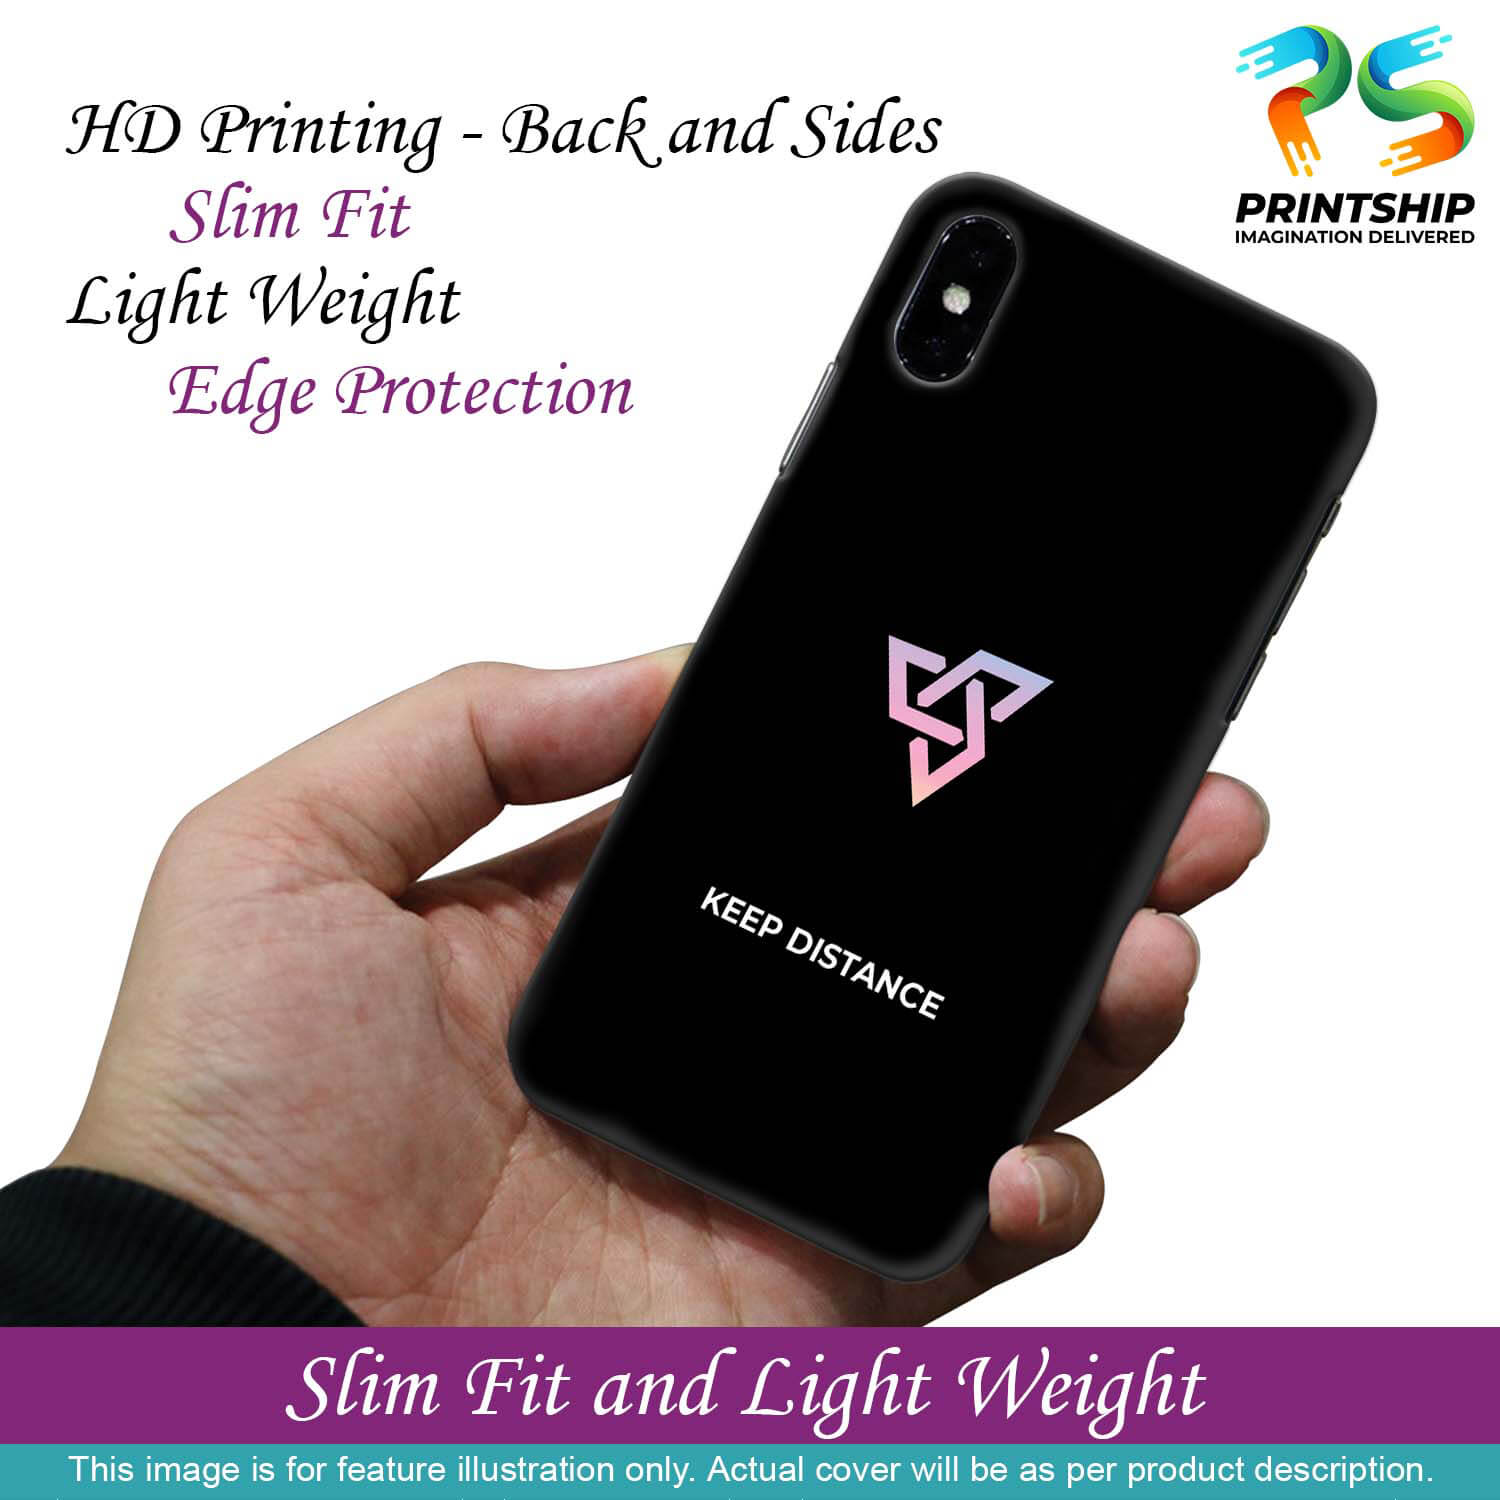 PS1334-Keep Distance Back Cover for Vivo Y20i